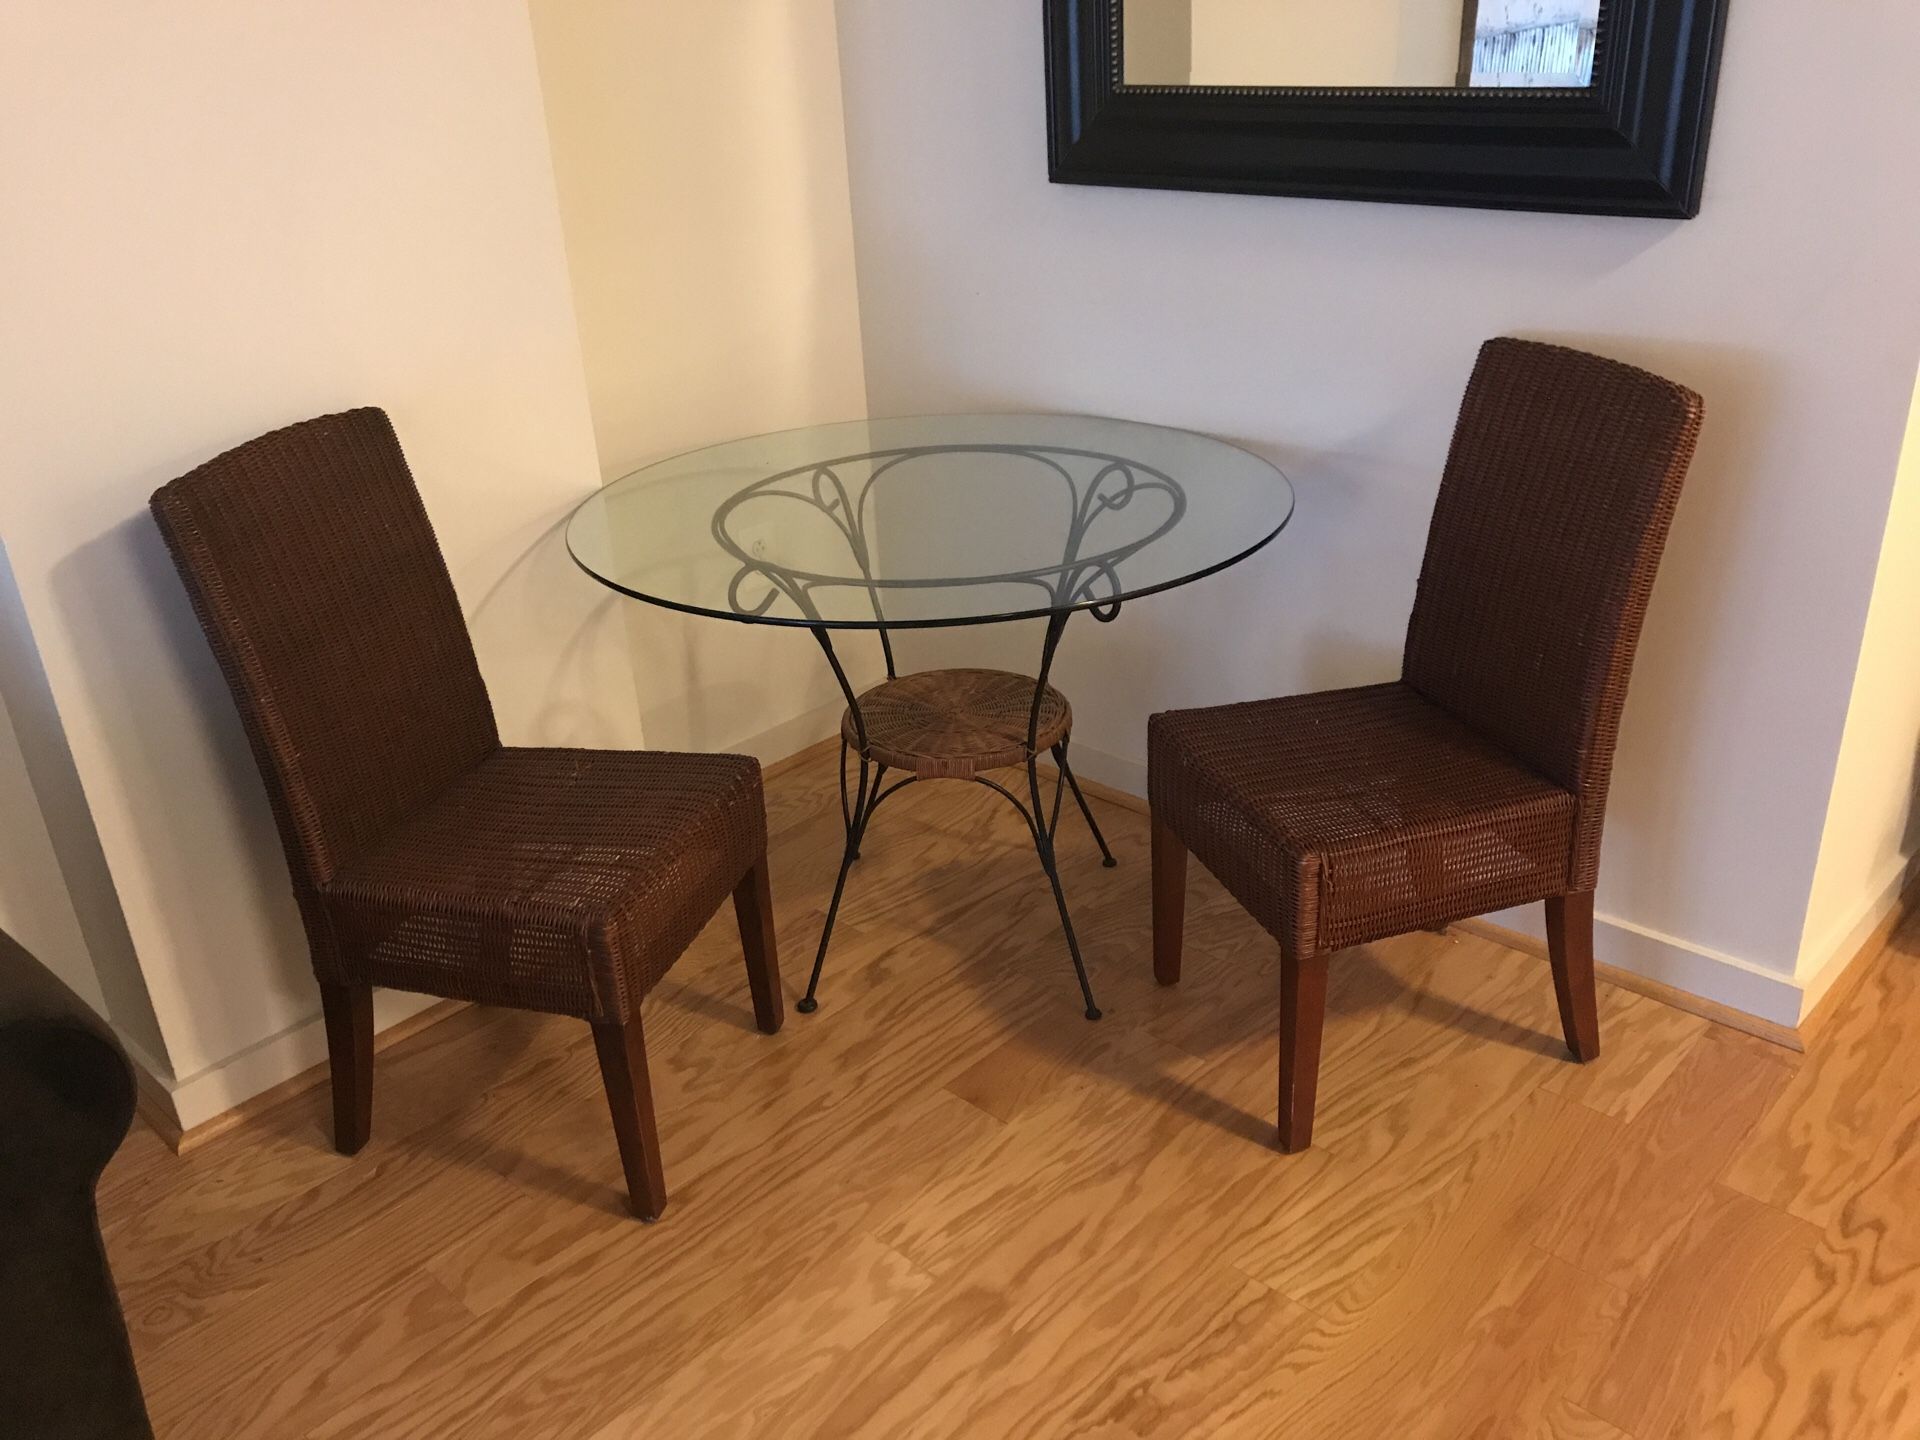 FREE- MUST PICK UP BY 10AM!! 41” Glass top table with 2 Pottery Barn wicker chairs